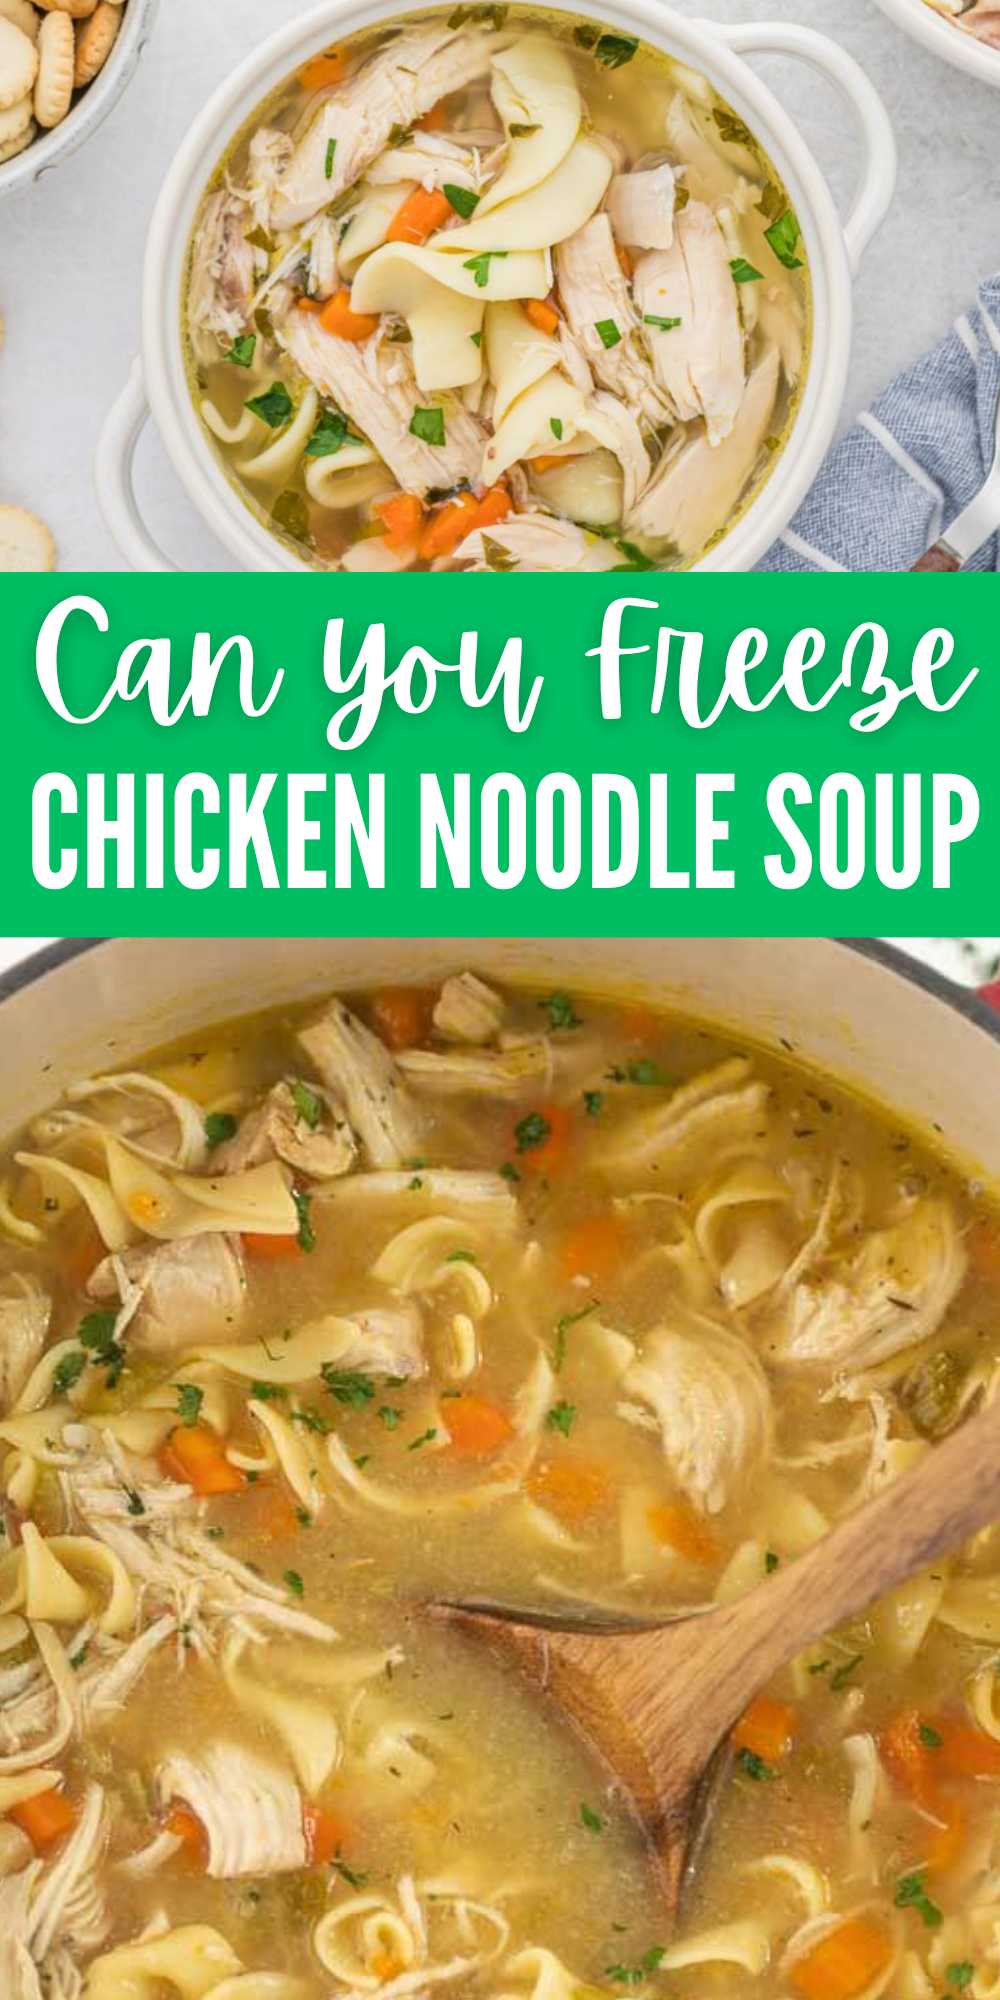 Chicken Noodle Soup is frequently ranked as one of the best comfort foods there is. But can you freeze chicken noodle soup? These easy freezer steps will have you enjoying soup all year long. #eatingonadime #canyoufreezechickennoodlesoup #chickennoodlsoup #freezertips